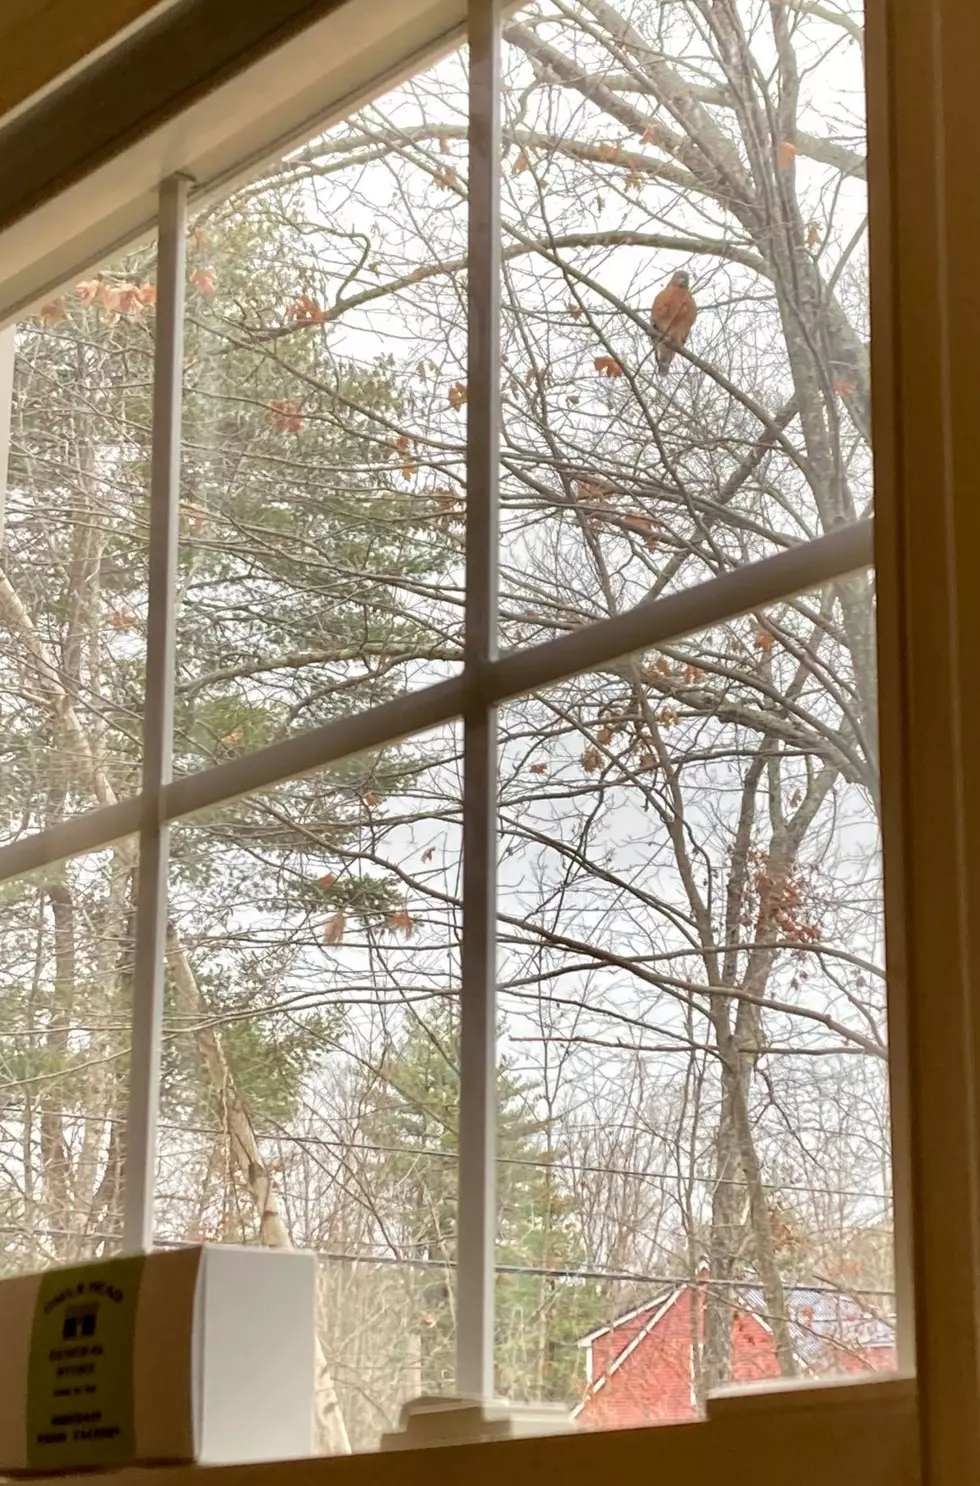 This NH Angry Bird is Mad at Us for Cutting His Tree Down&#8230; And I Don&#8217;t Blame Him